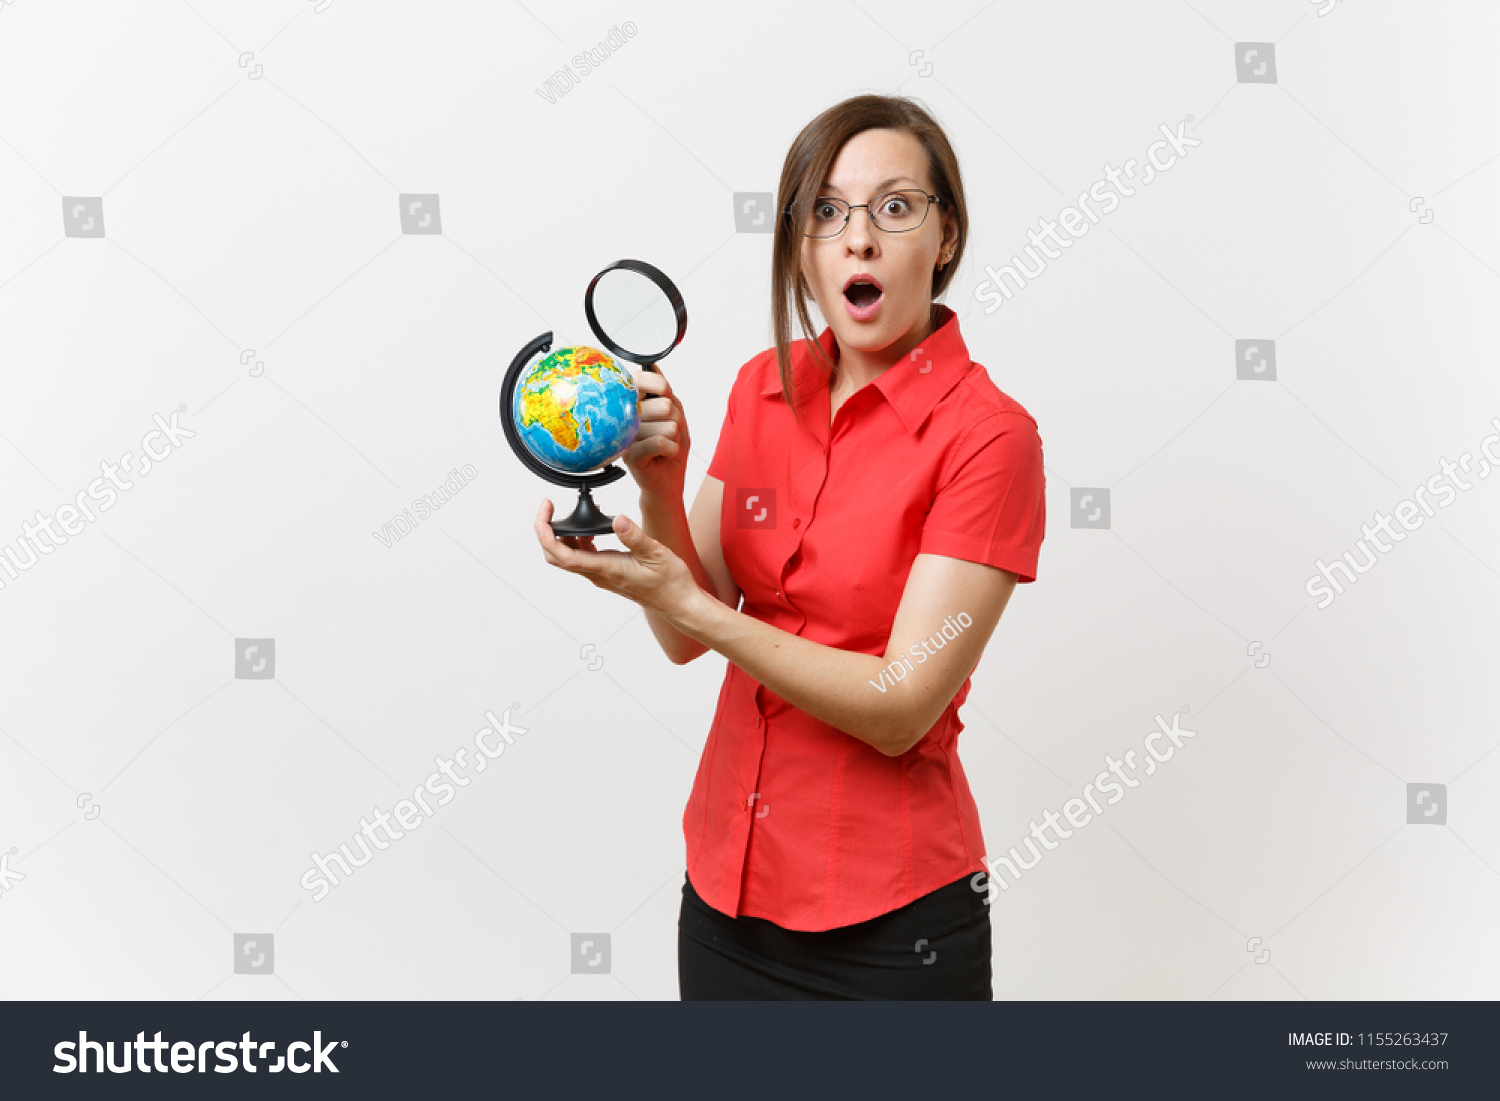 Portrait of business teacher woman in red shirt holding and looking through magnifying glass on globe isolated on white background. Education teaching in high school university concept. Copy space #1155263437